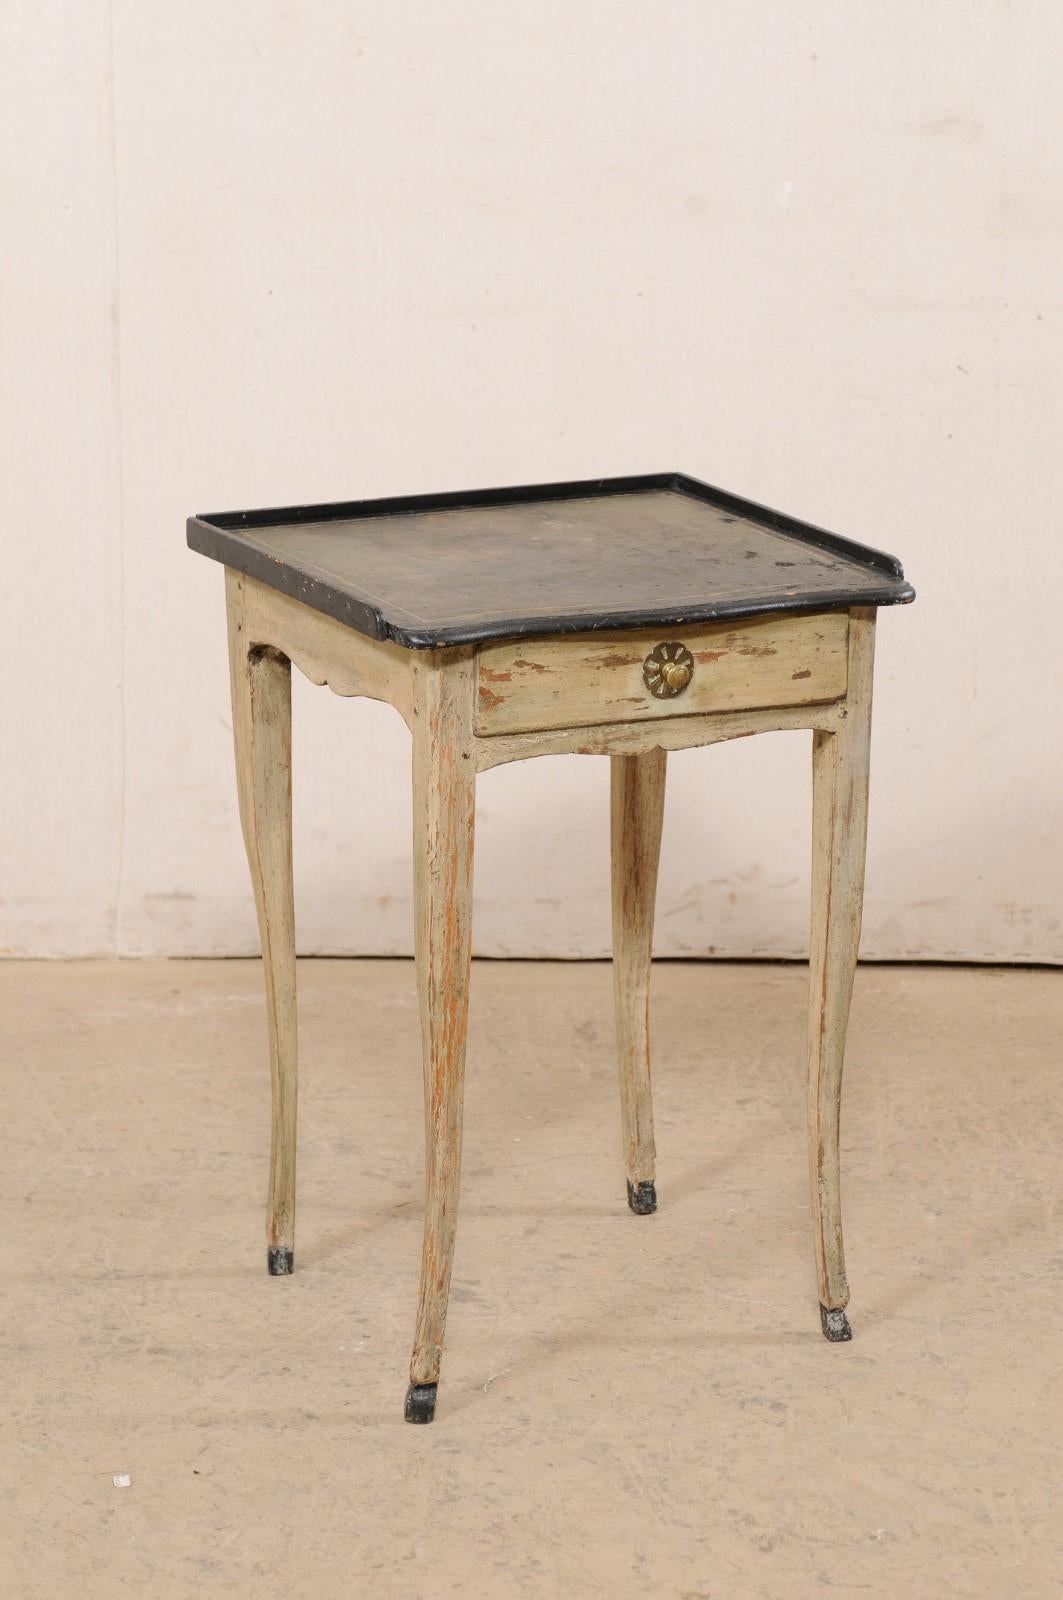 A small French wooden side table with single drawer and leather top, from the early 19th century. This antique end table from France retains it's original black and green leather top, which is set within a raised lip along three sides. The apron